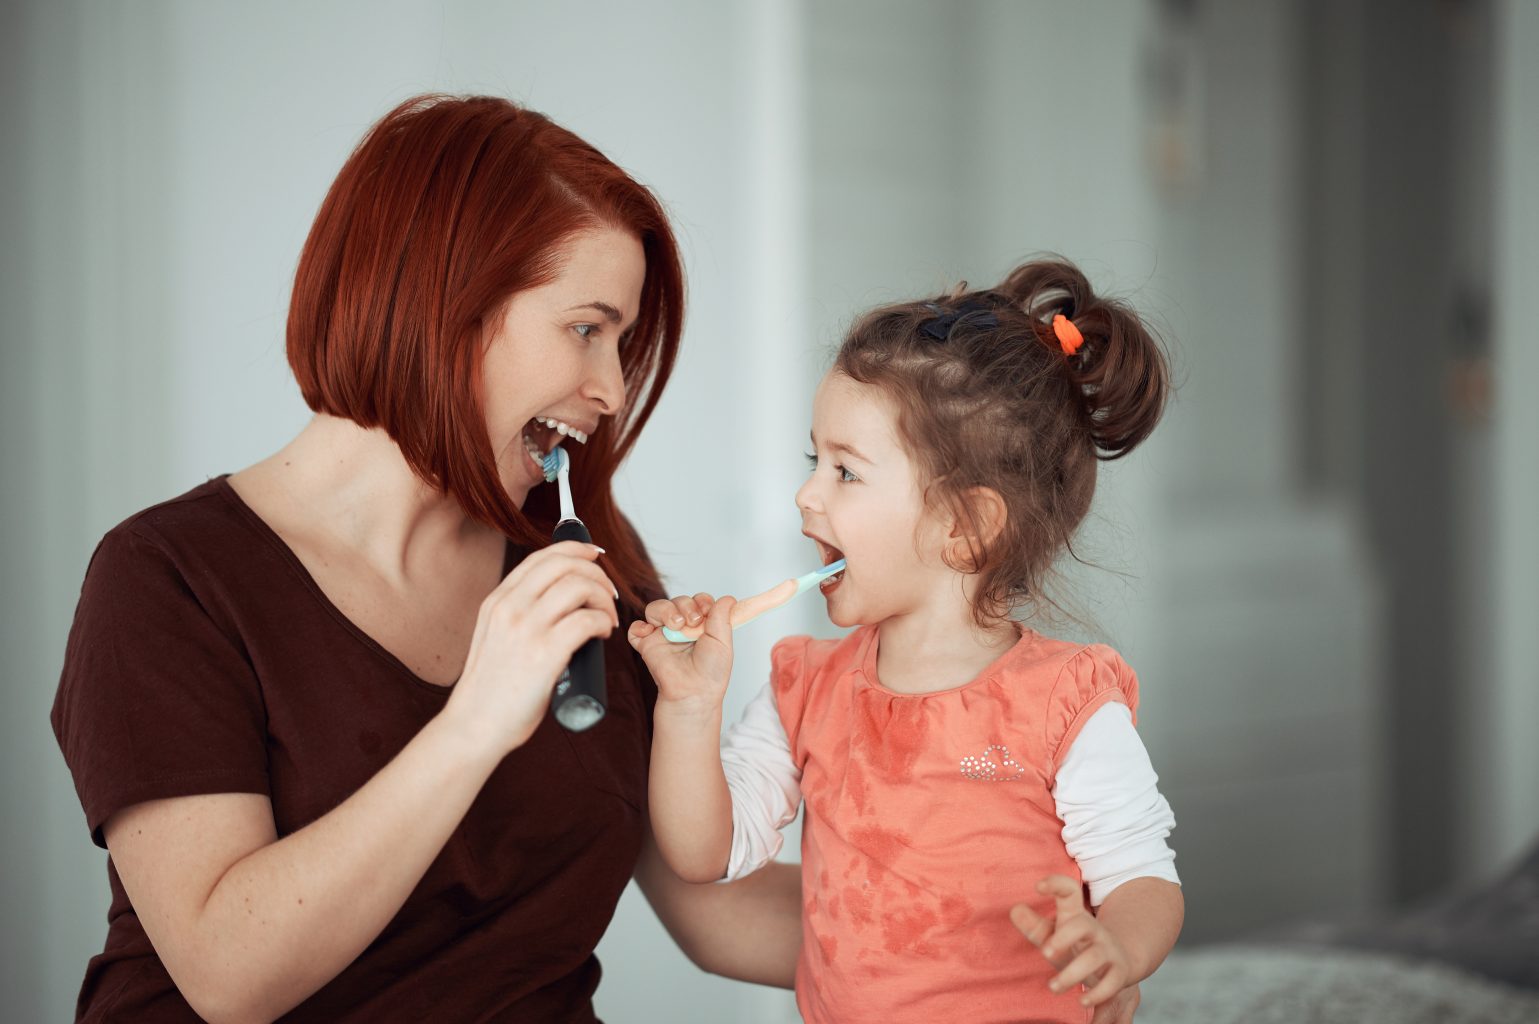 Redhead mother and baby girl indoors, brush their teeth, cleaning and routine photos